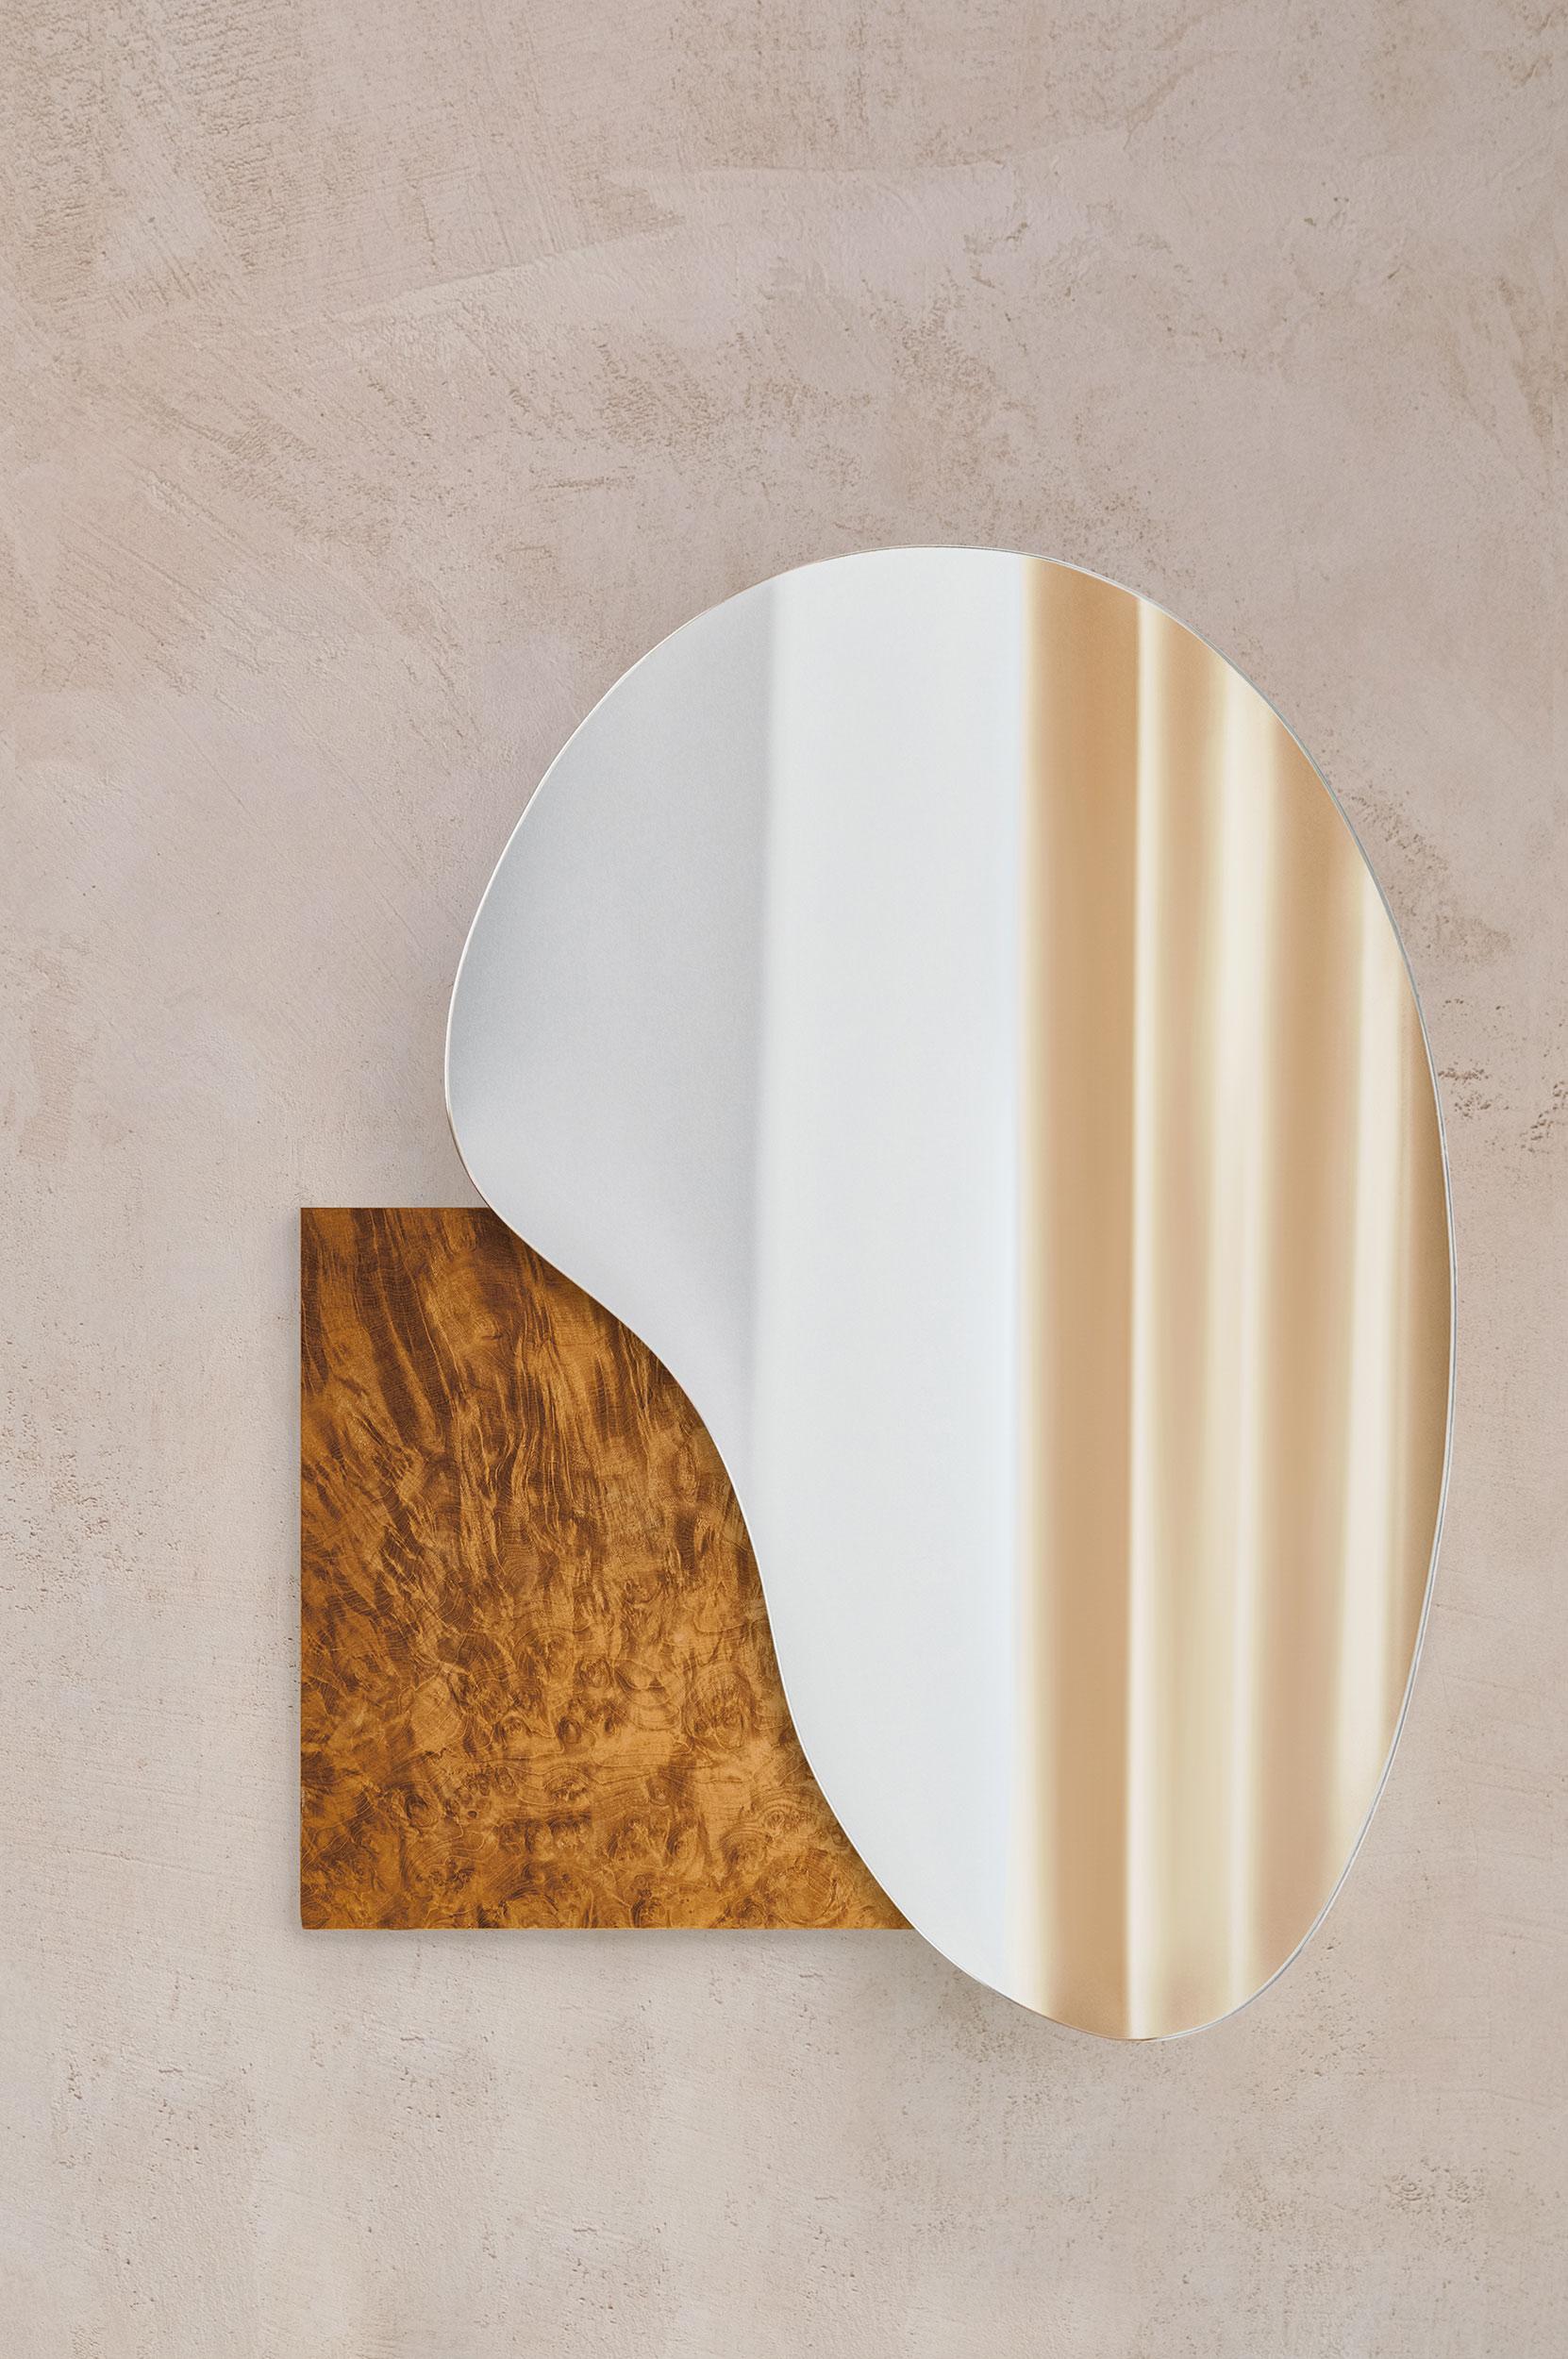 Brushed Contemporary Wall Mirror Lake 4 by Noom, Veneered Wood Base For Sale